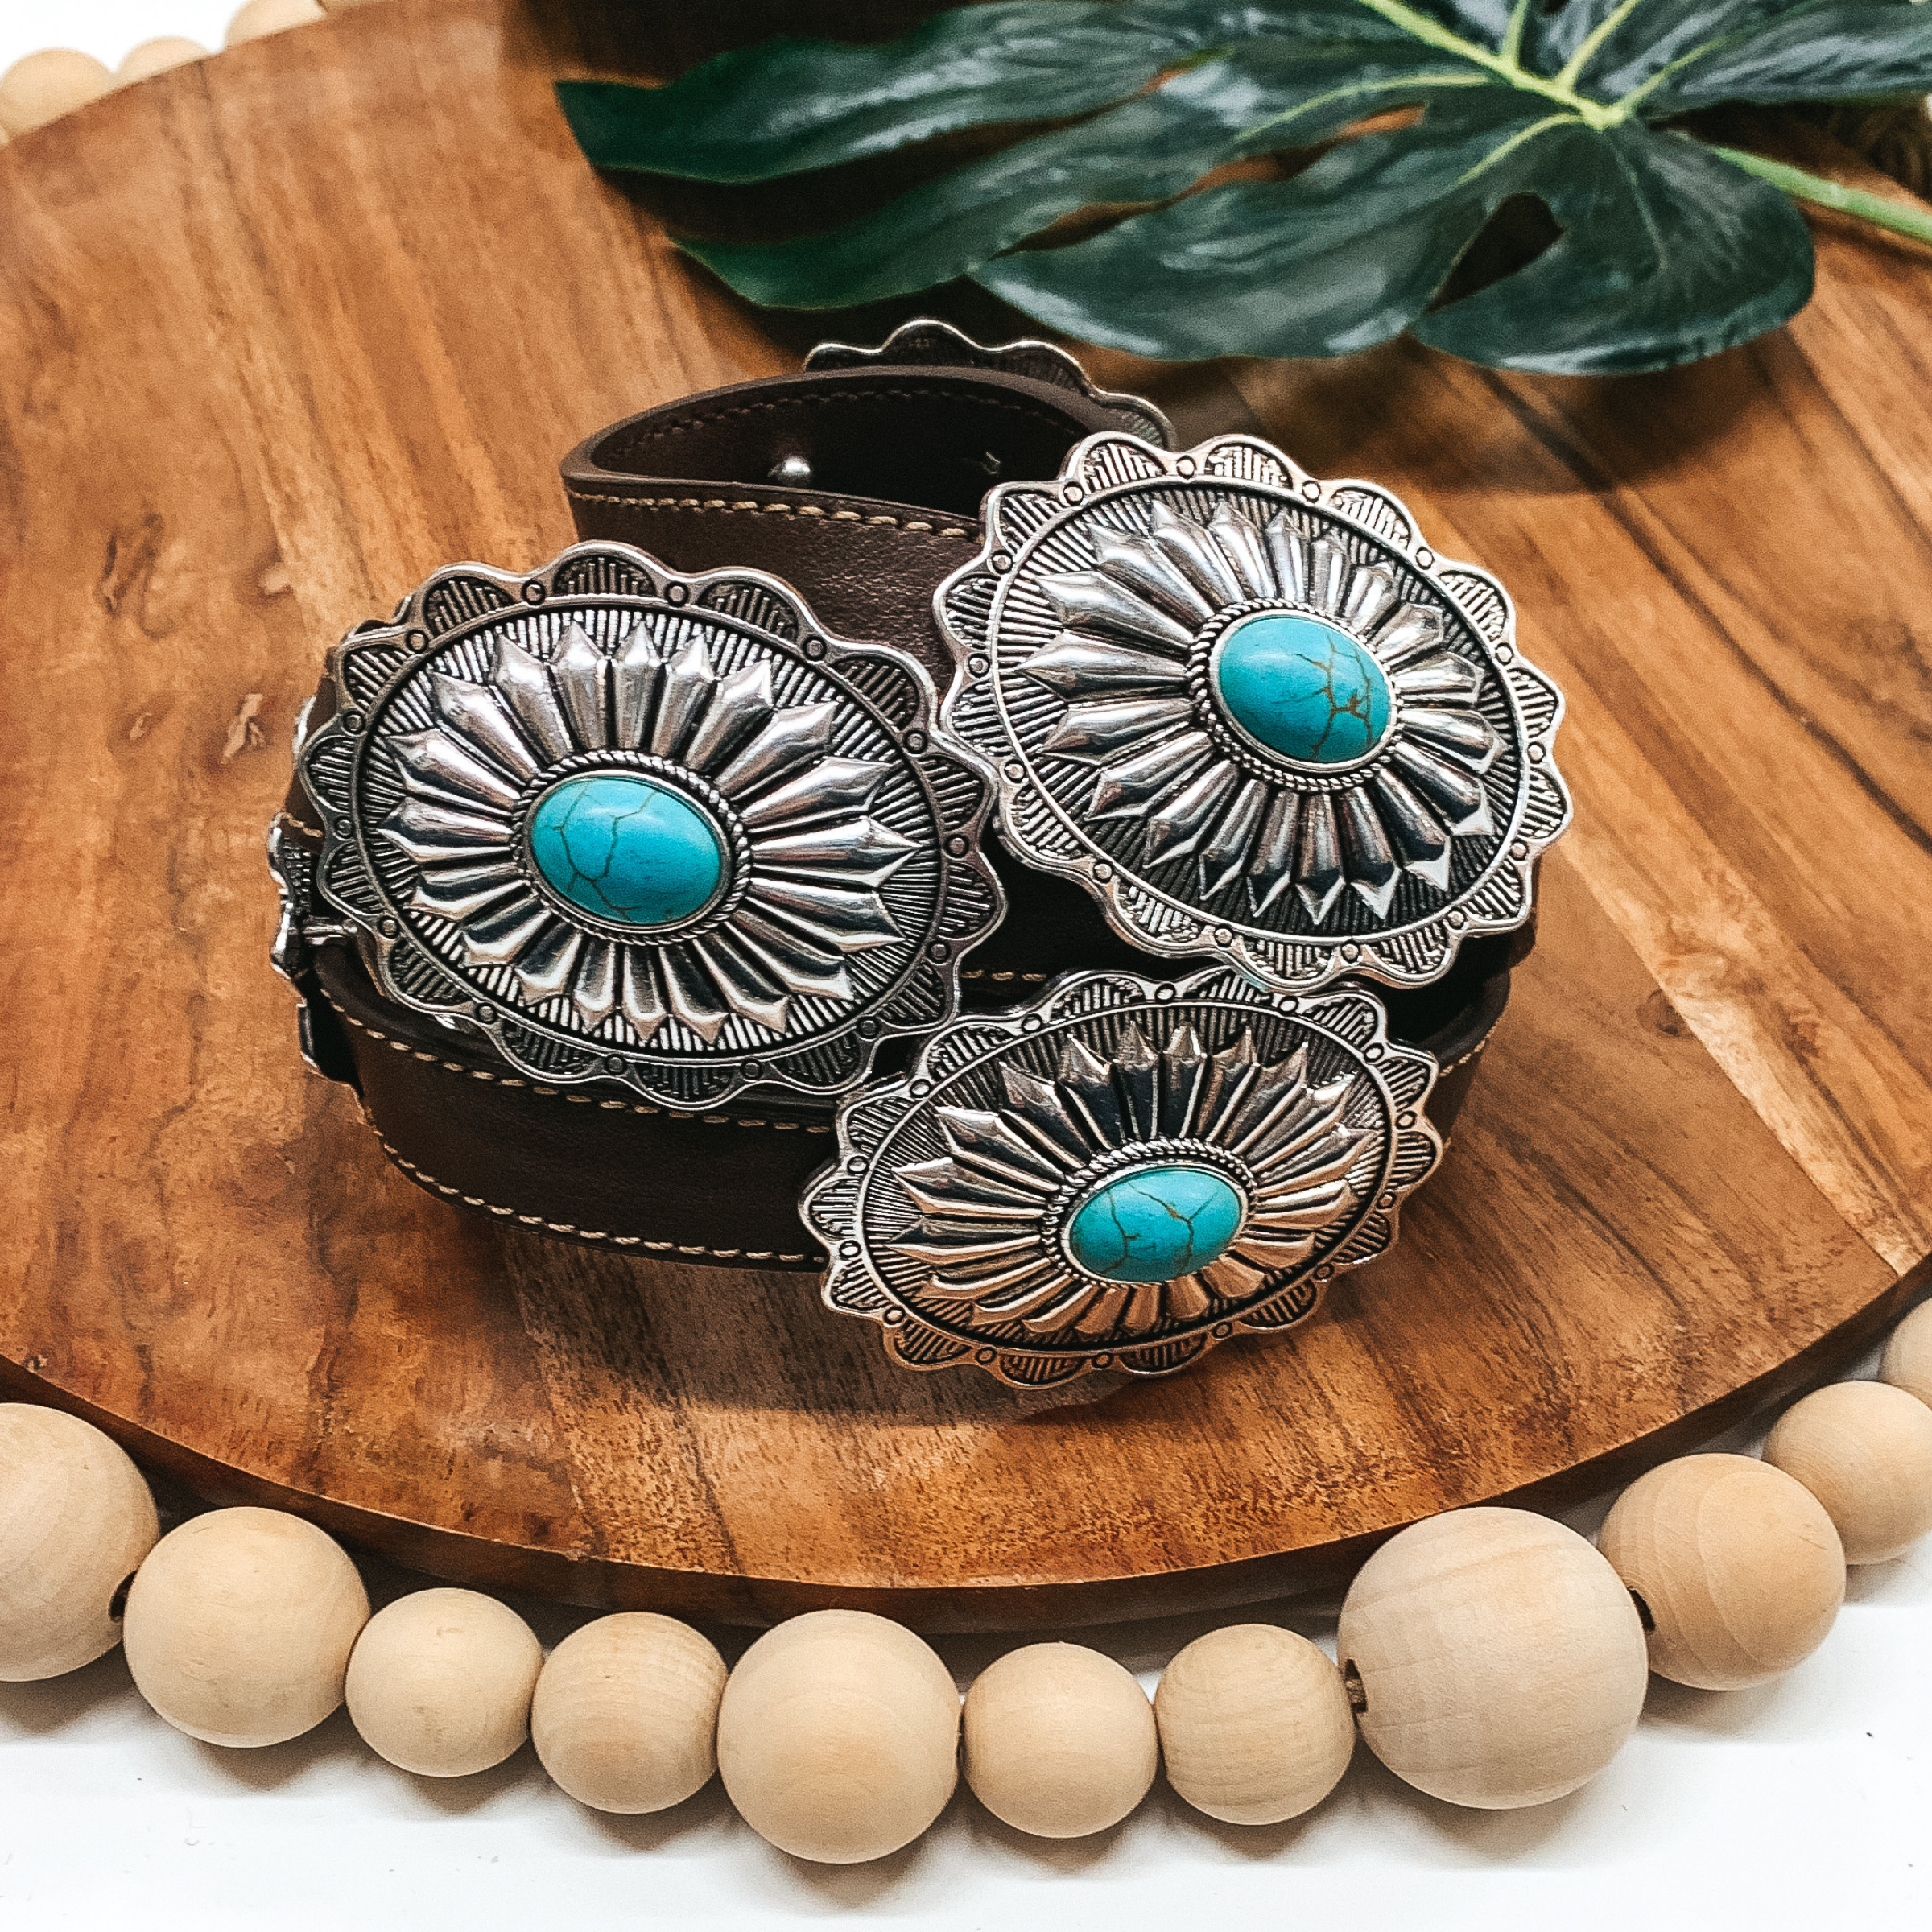 Brown Belt with Silver Tone Conchos and Turquoise Stones - Giddy Up Glamour Boutique